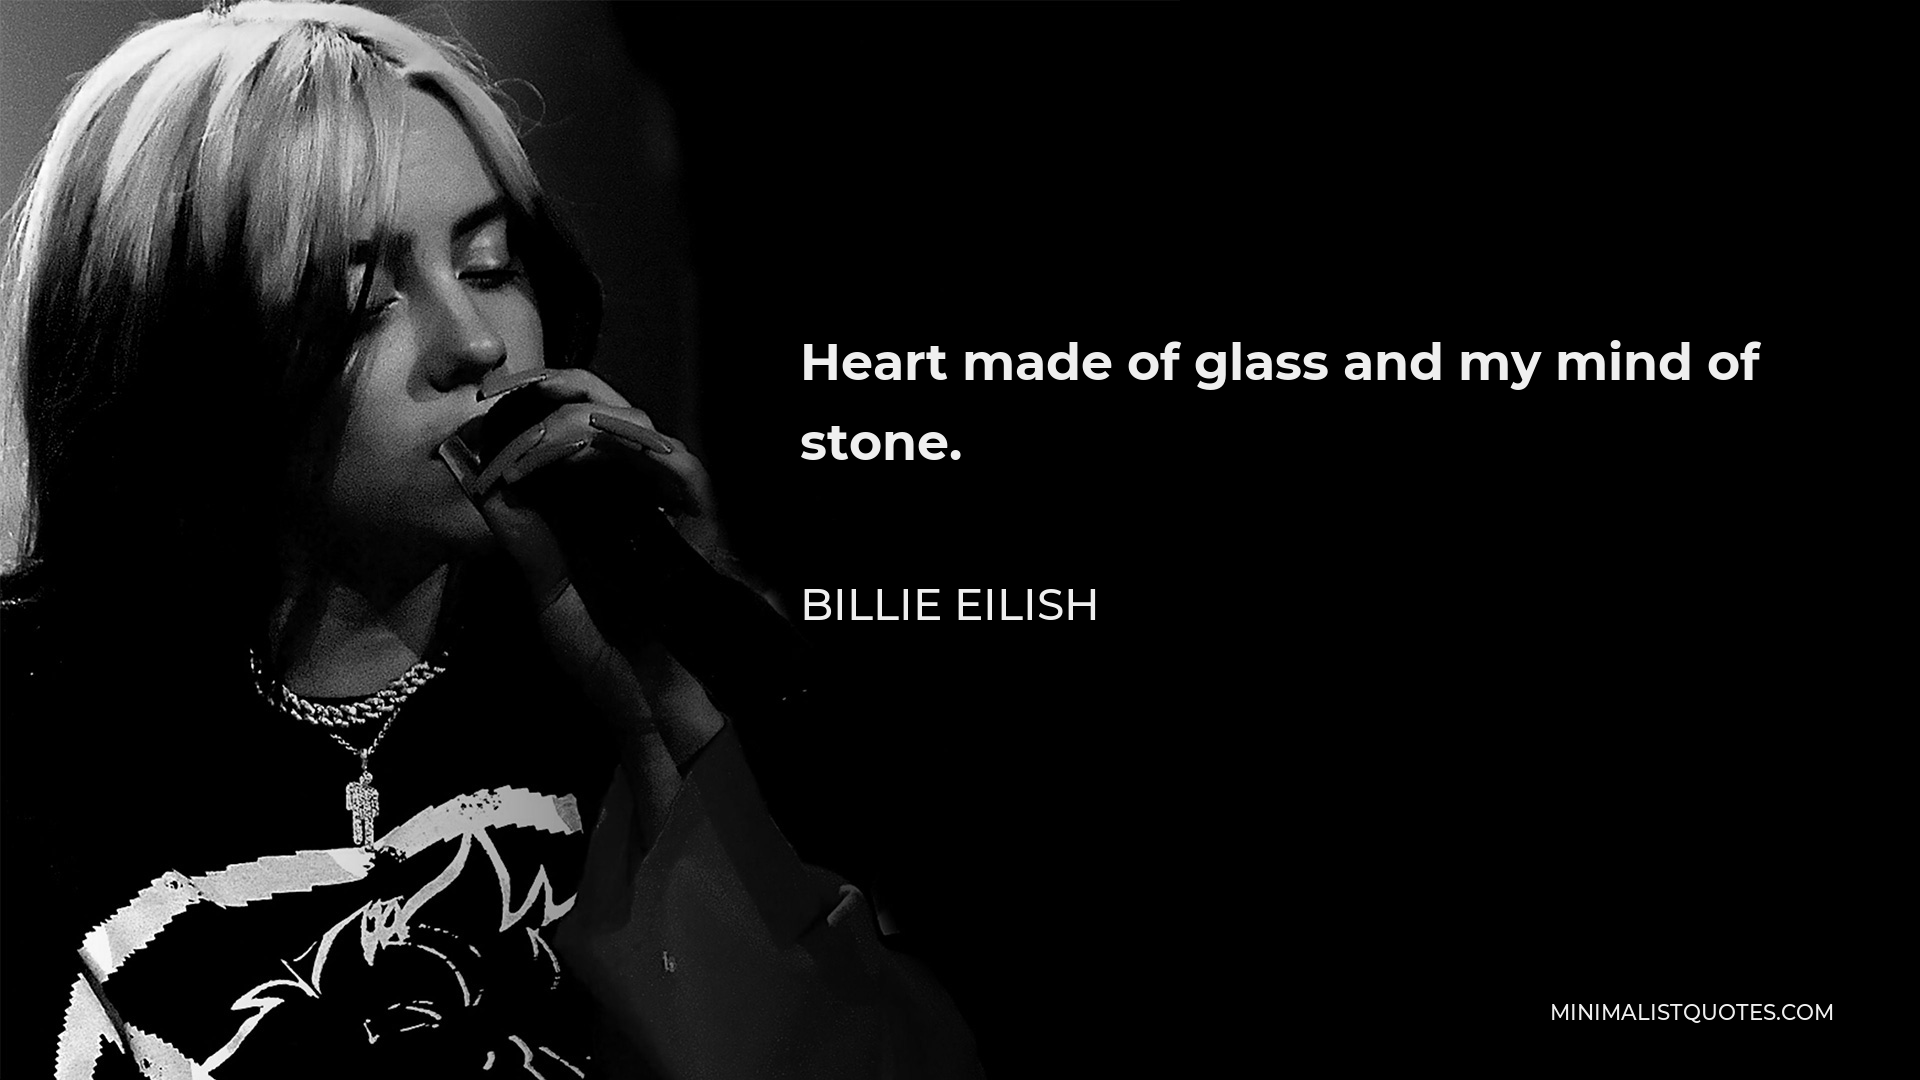 Billie Eilish Quote - Heart made of glass and my mind of stone.